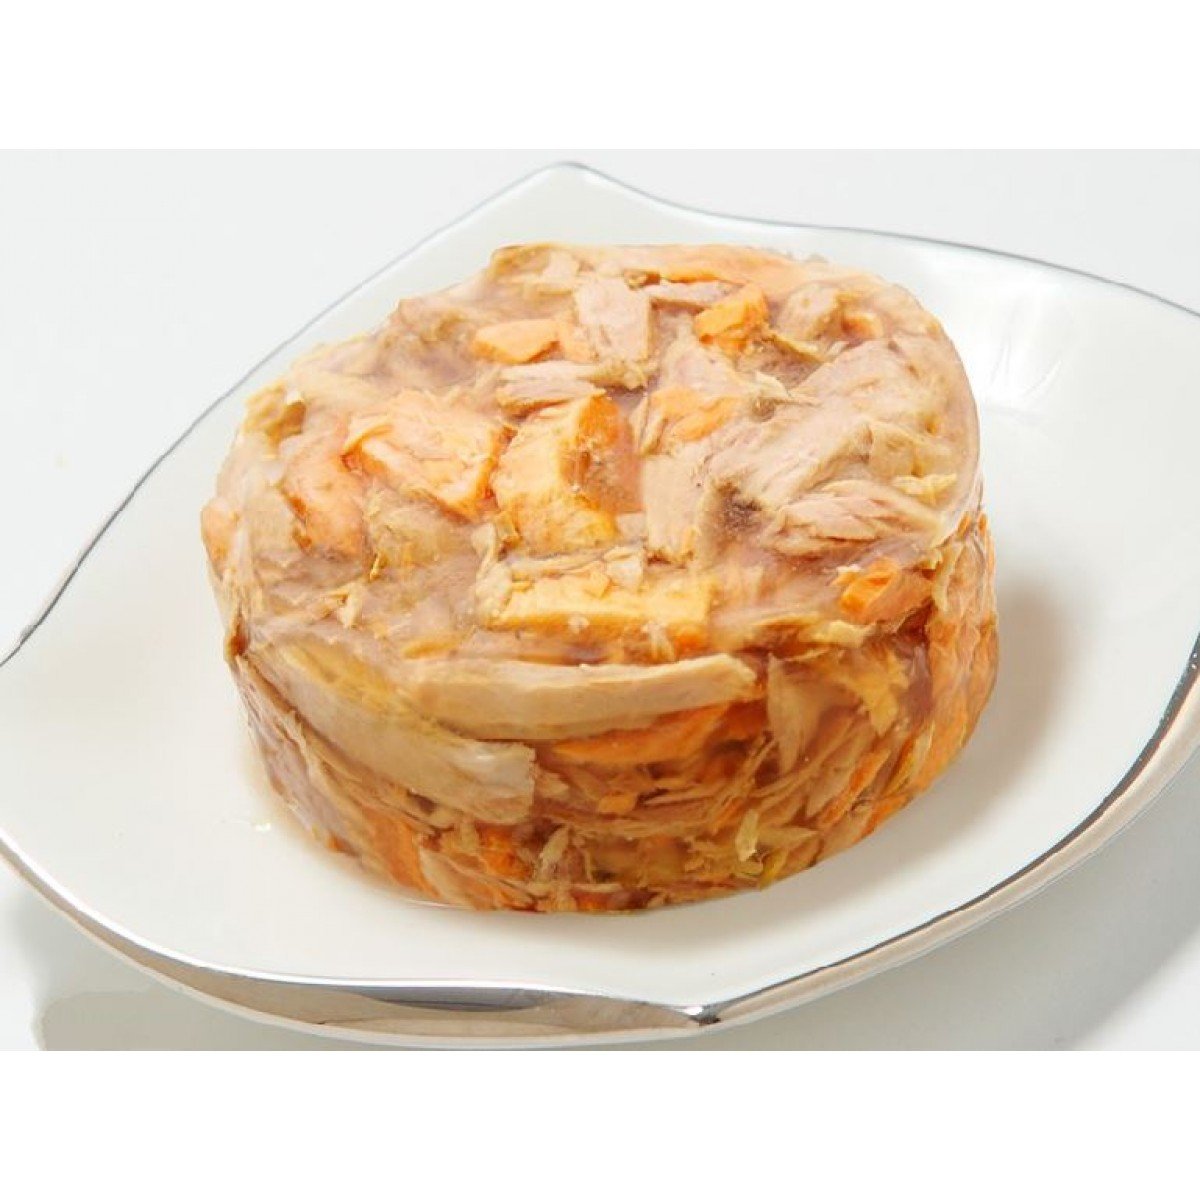 Kakato - Salmon & Tuna (Dogs & Cats) Canned from Vetopia Online Store